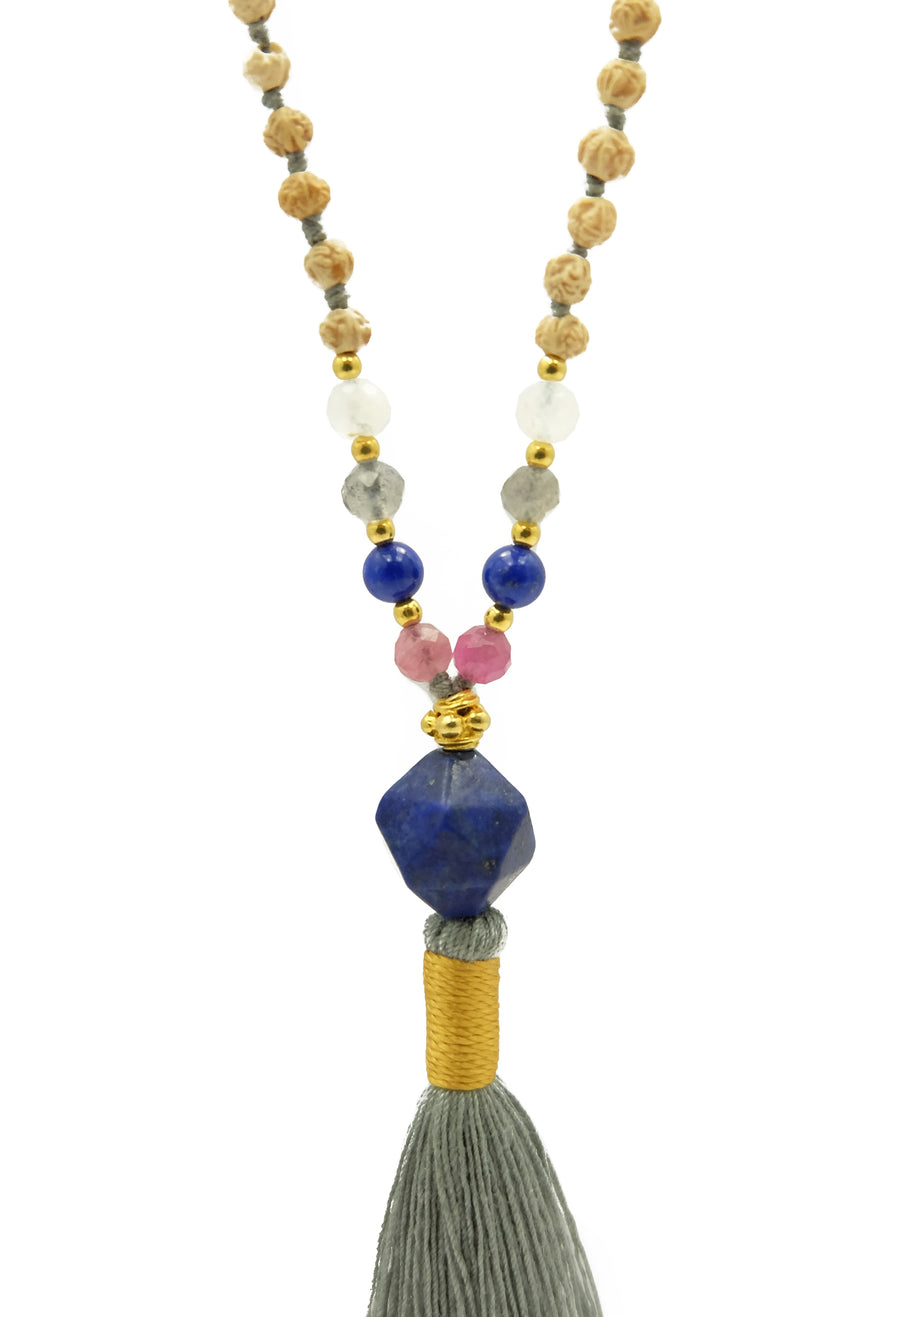 Image: Ice Moon Mala - Cooling Gemstones | Moonstone, Labradorite, Tourmaline | Rudrani Seeds | 22k Gold Accents | Lapis Lazuli Pendant. Find balance and tranquility with this serene Ice Moon Mala inspired by Native American tradition. Calm irritable moods and perfectionist minds with the cooling, calming nature of moonstone, labradorite, and tourmaline gemstones. Ideal for spiritual seekers and those seeking inner harmony.